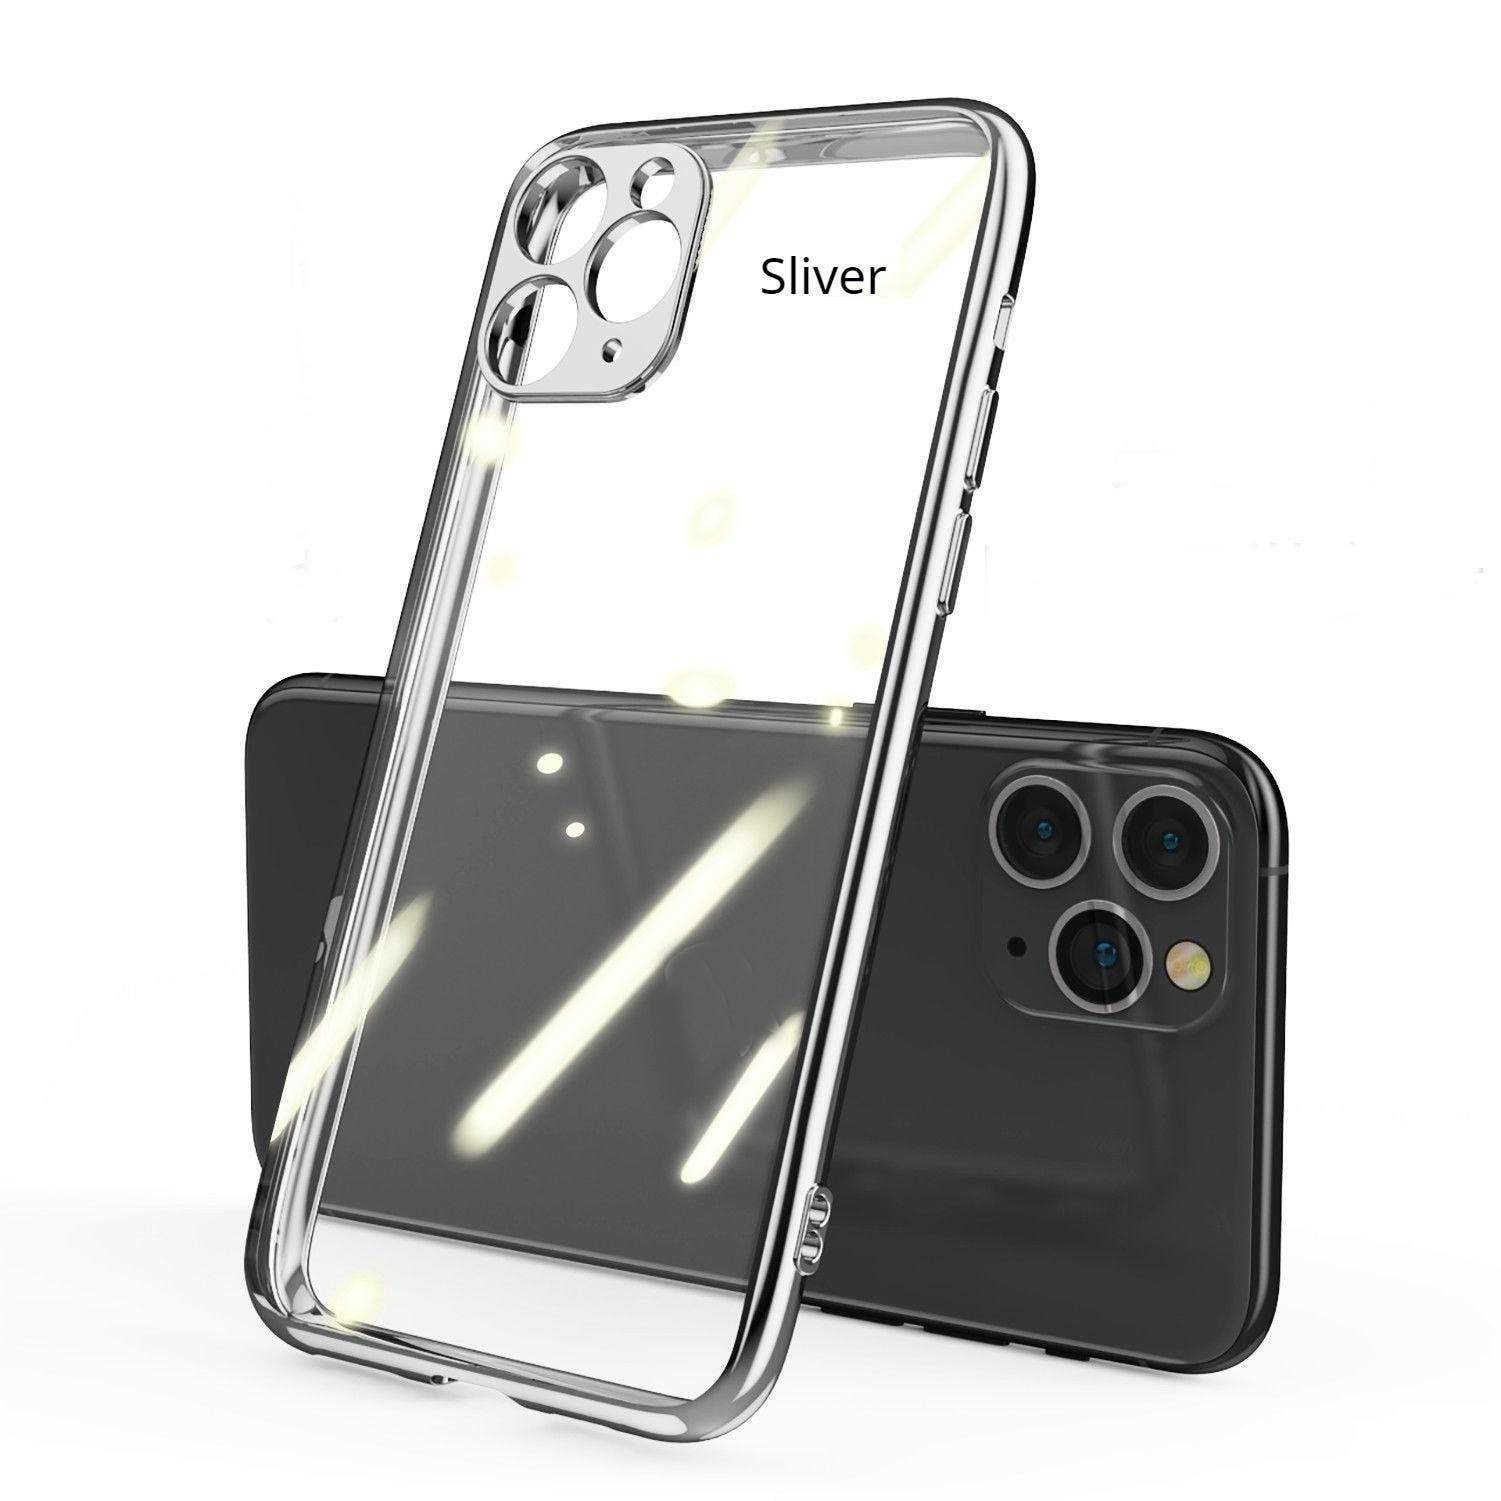 Soft Transparent iPhone Cute Phone Cases For iPhone 11 12 Pro Max 7 8 plus X Xs XR SE - Touchy Style .